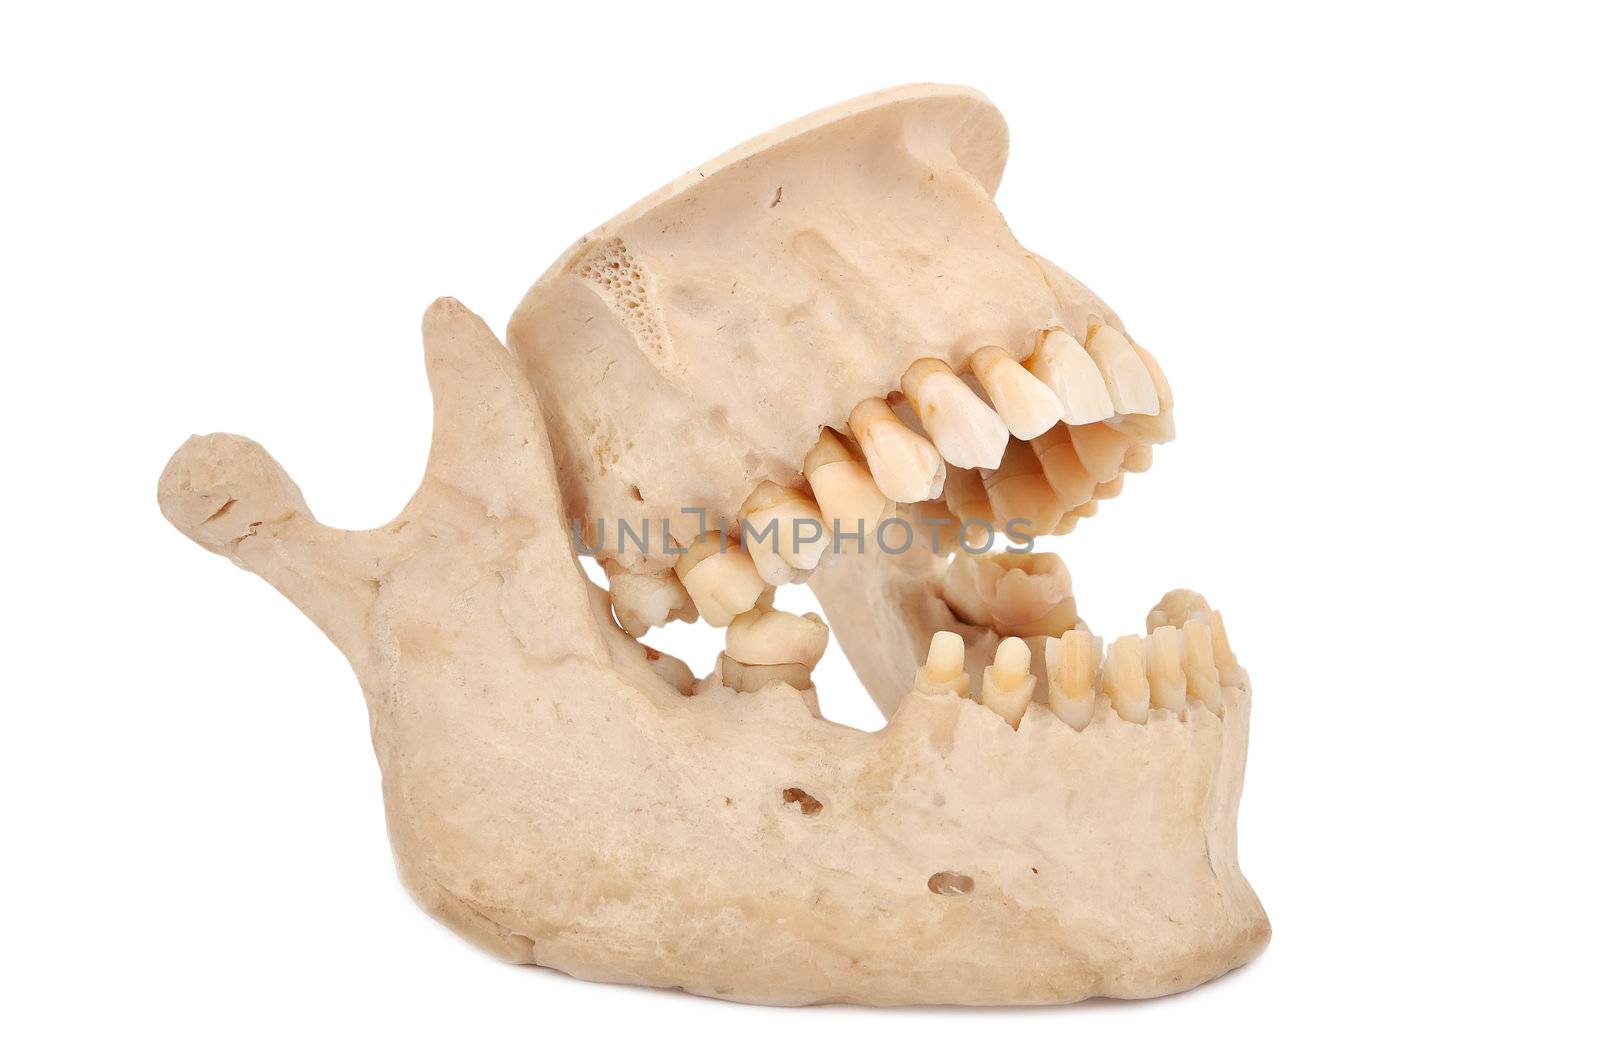 model of human teeth on a white background